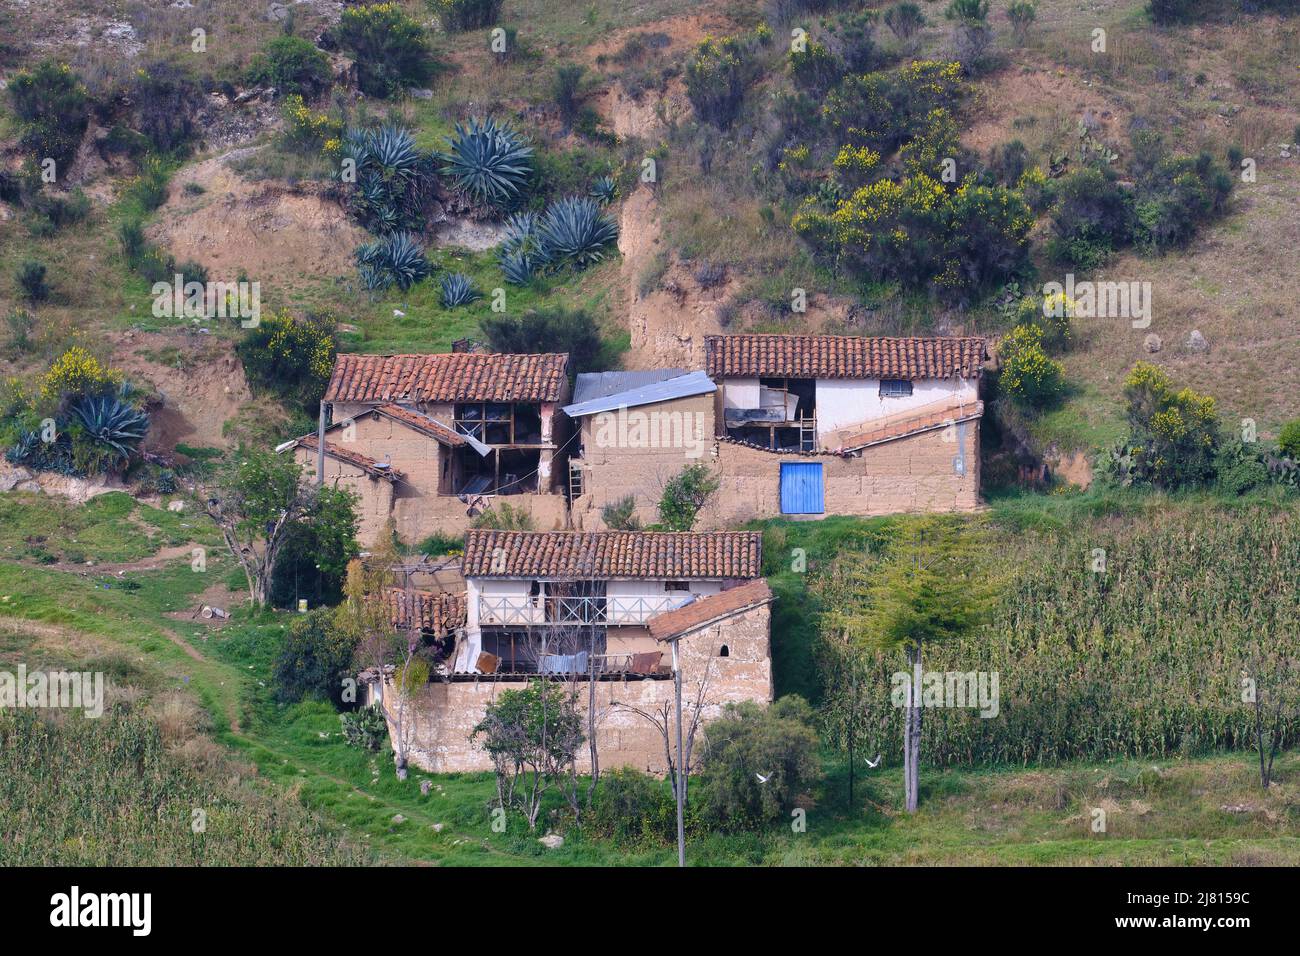 Group of country houses made of adobe and rustic materials by local people. Stock Photo